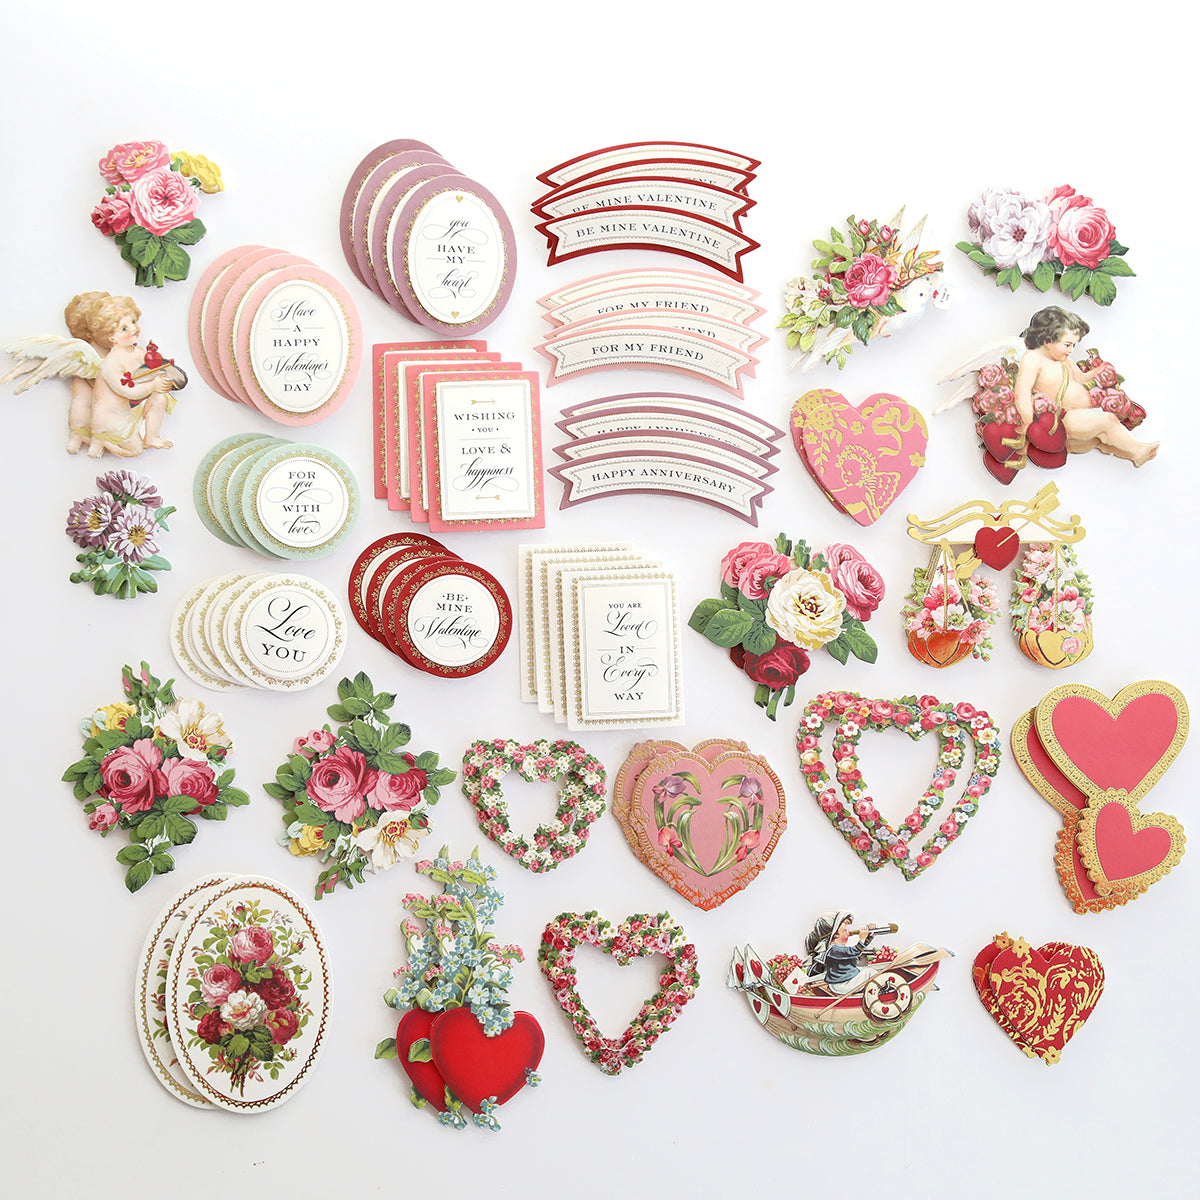 Celebrate Valentine's day with a Romantic Stickers and Sentiments filled folio.